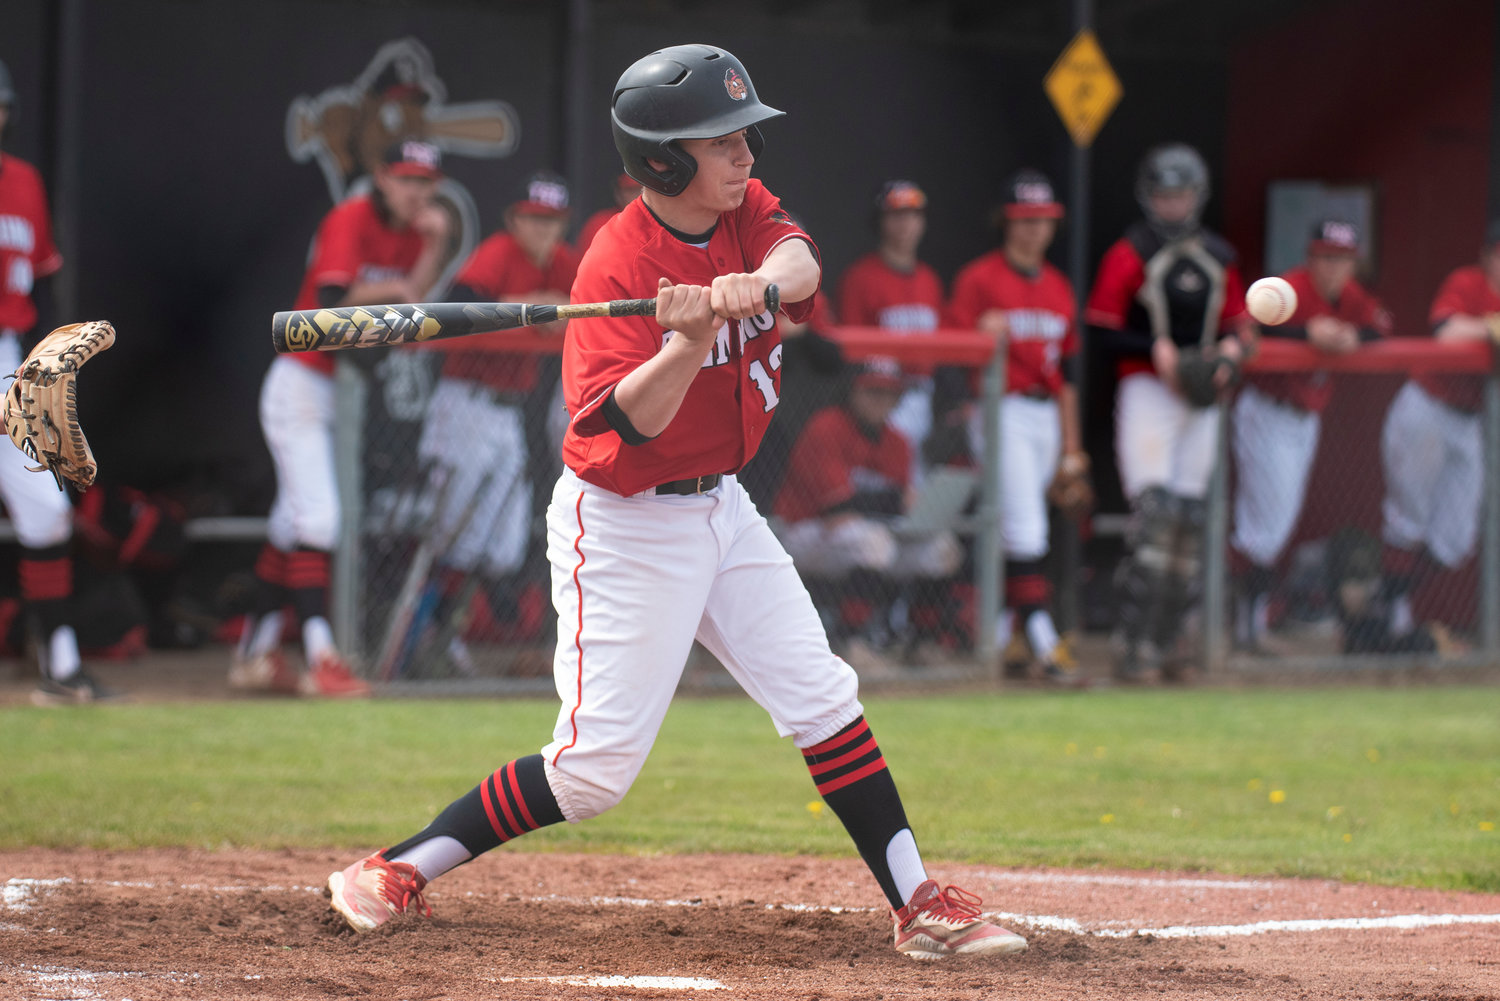 Tenino's Carson Hart lines up an Elma pitch during a home game on April 29.